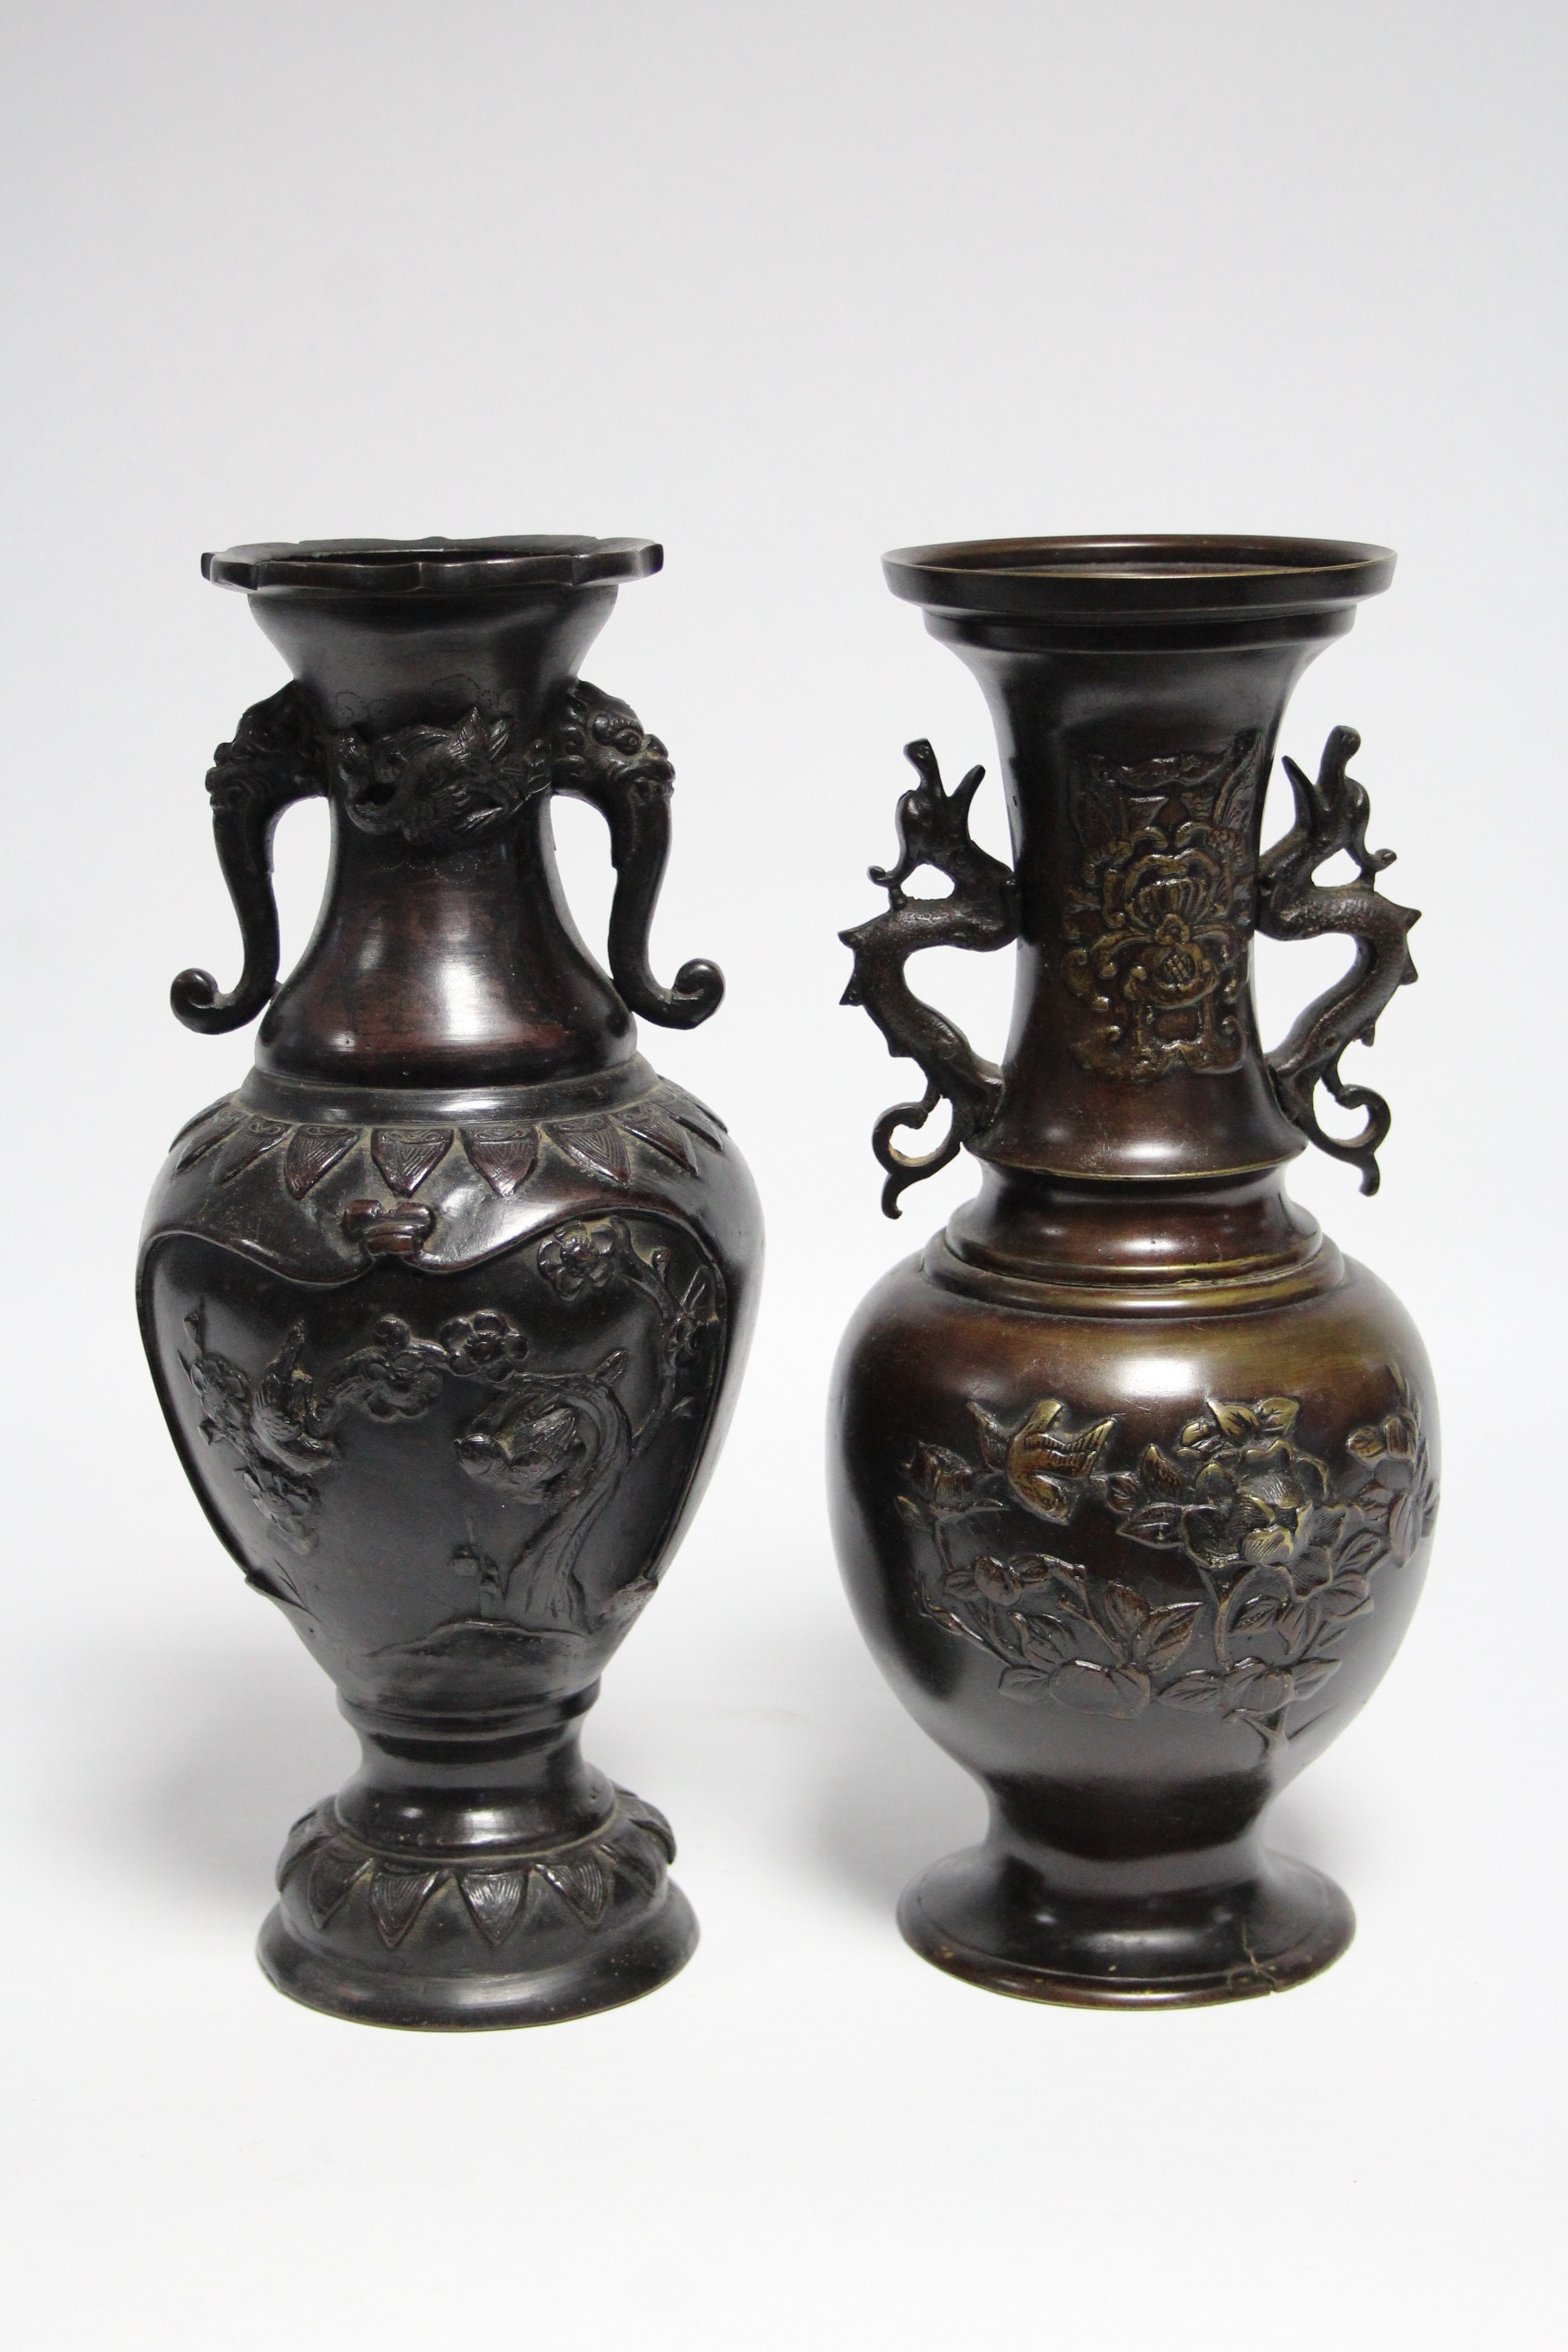 A 19th century Japanese bronze ovoid vase with grotesque mask side handles & raised decoration of - Image 2 of 3